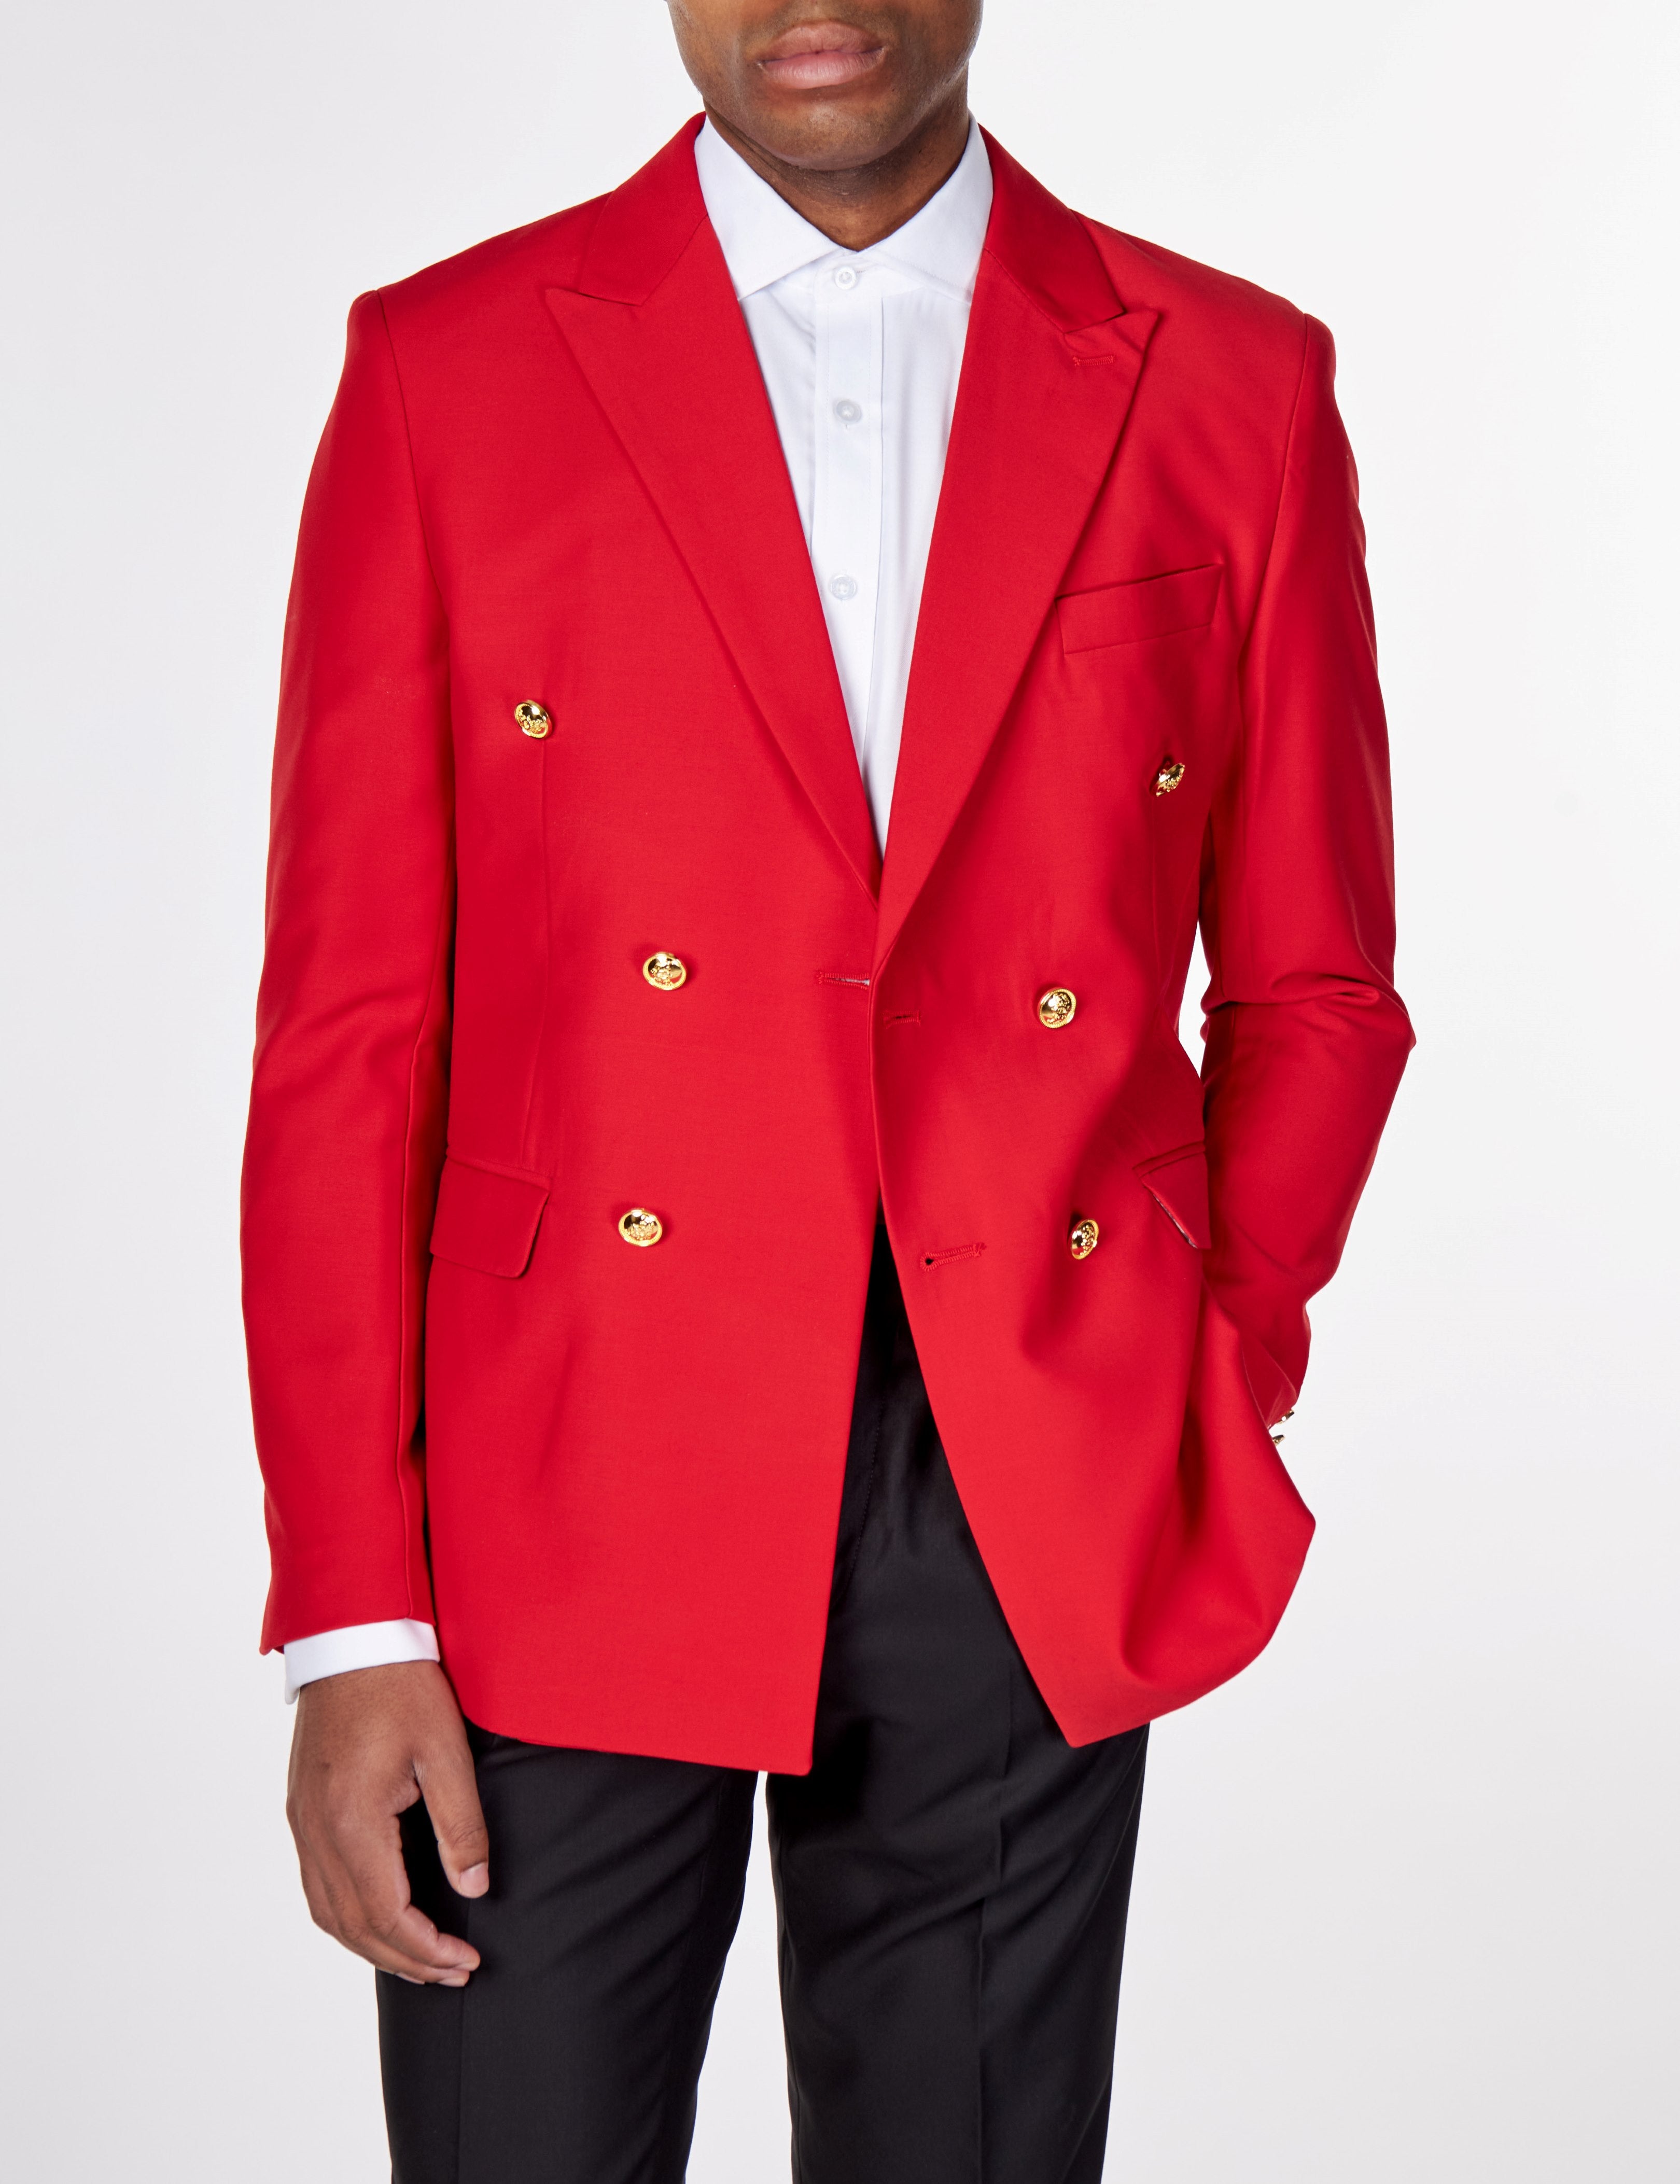 RED DOUBLE BREASTED GOLD BUTTON JACKET